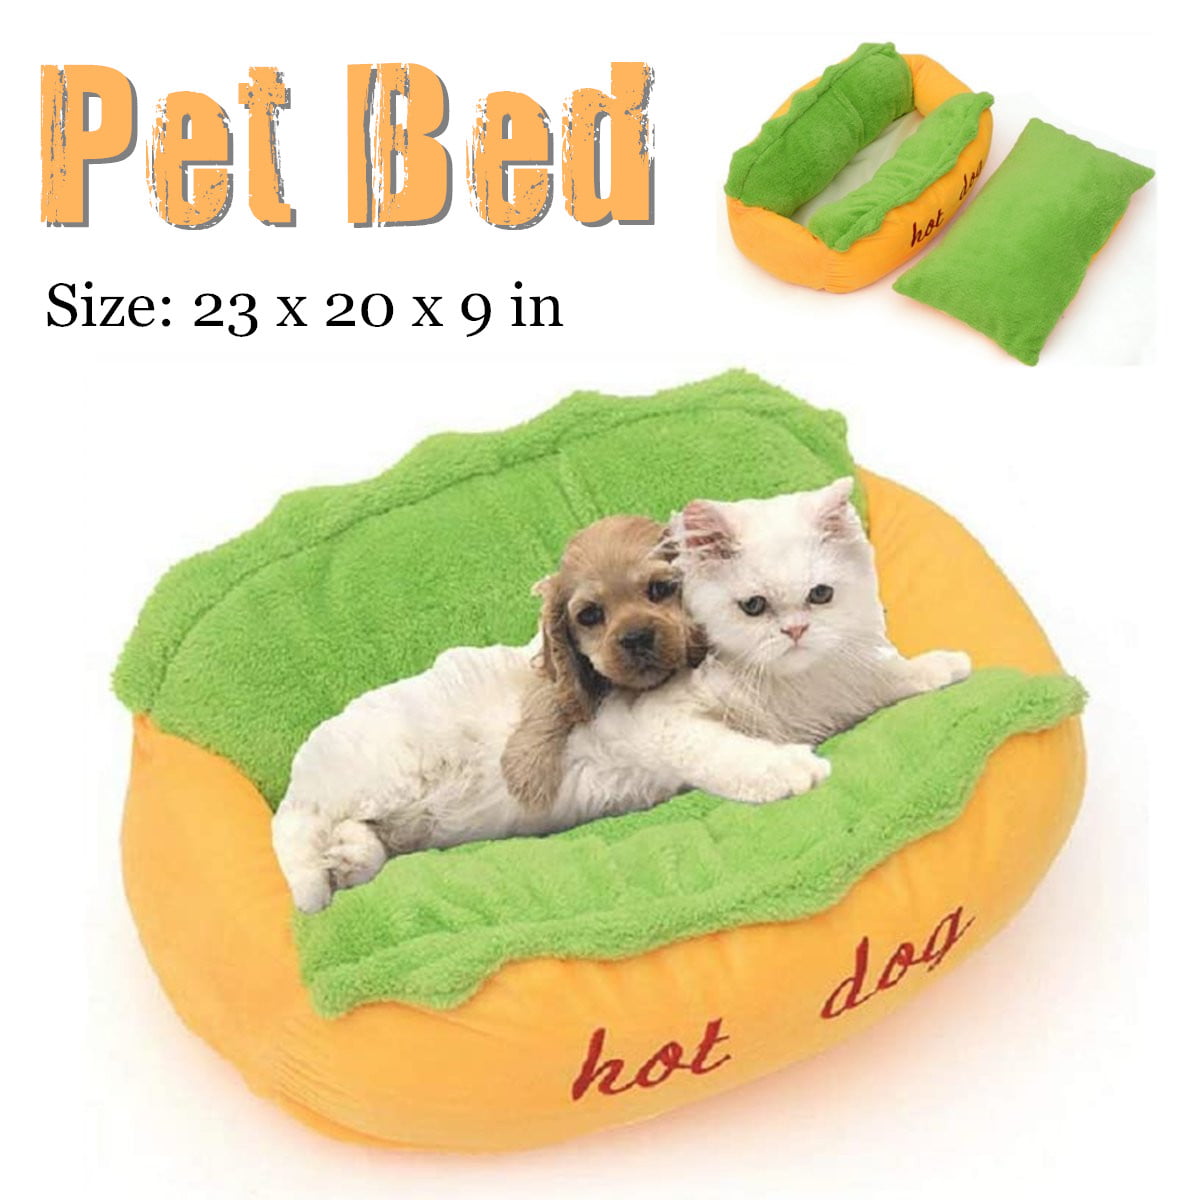 Hot Dog Washable Cotton Kennel Dog Nest Puppy Pet Bed House Warm Cushion Pad Mat